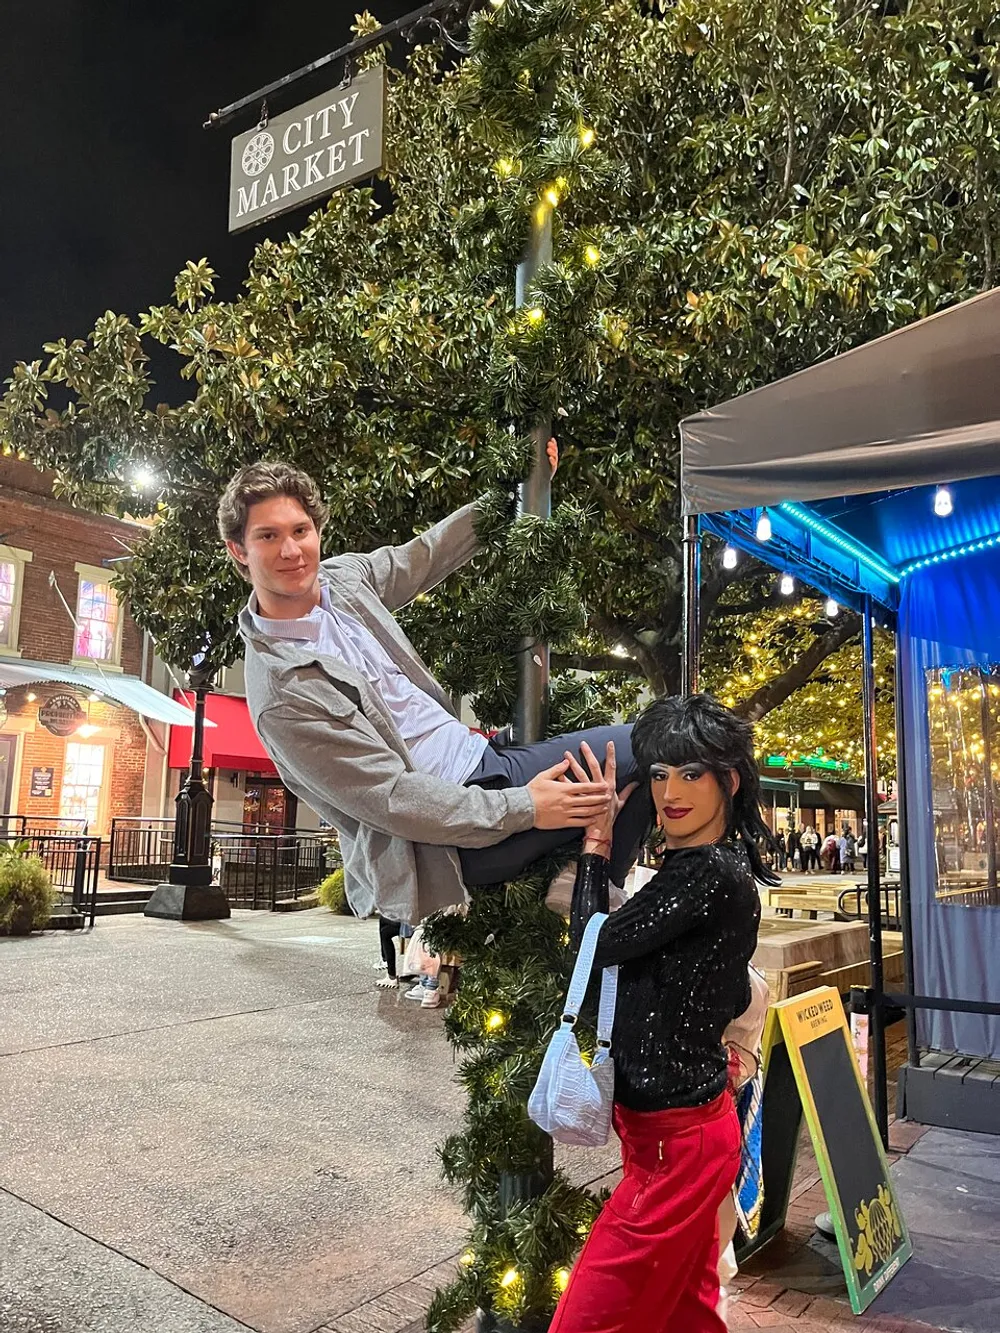 A person is playfully climbing a lamppost decorated with greenery while another person stands next to them posing with a smile on a city street at night